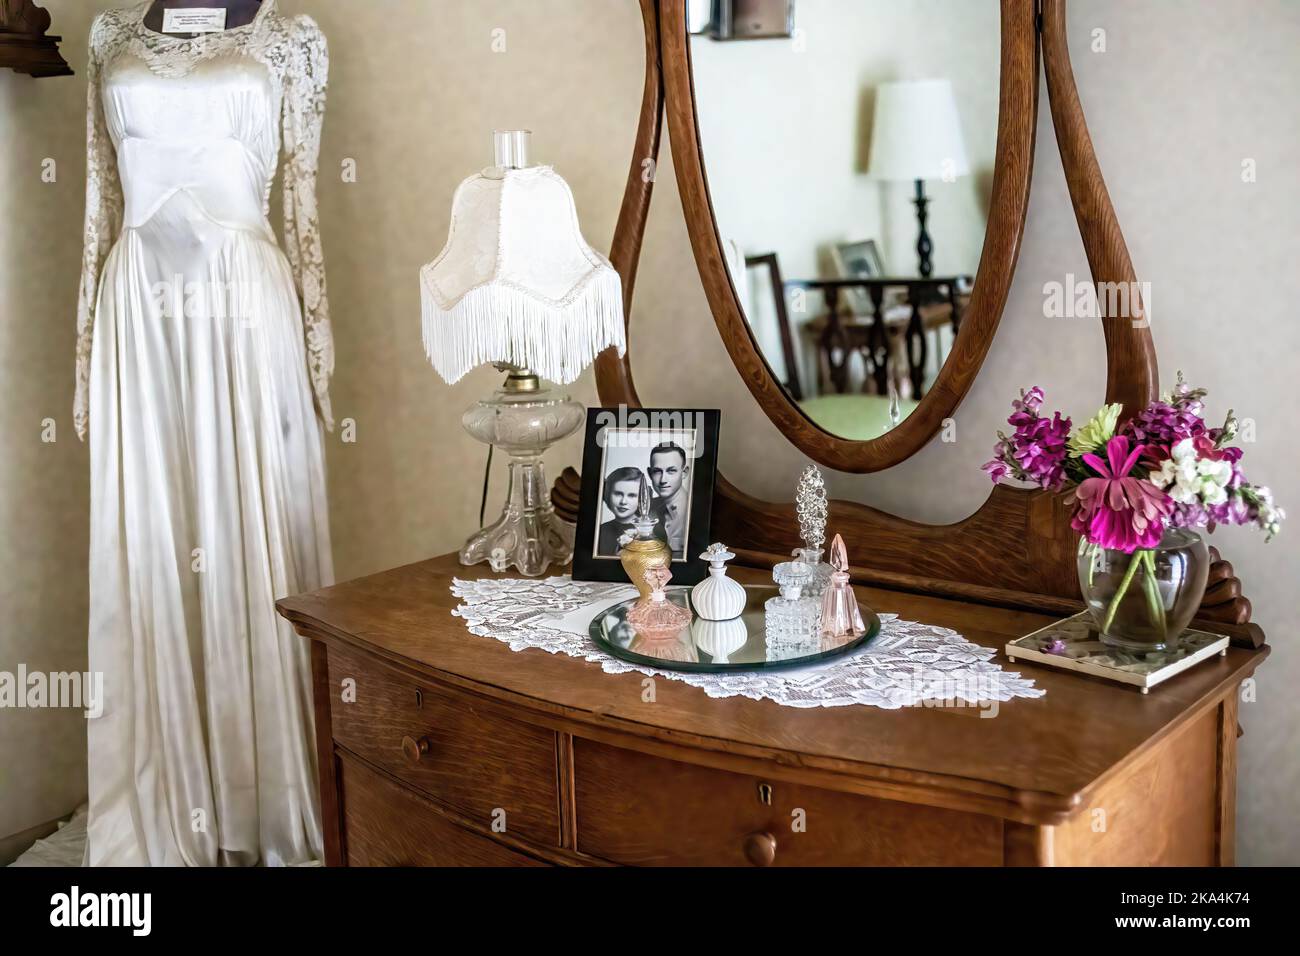 Antique dresser and mirror with an assortment of perfume bottles, wedding picture, flowers, lamp, and a wedding dress in the corner in a bride's room. Stock Photo